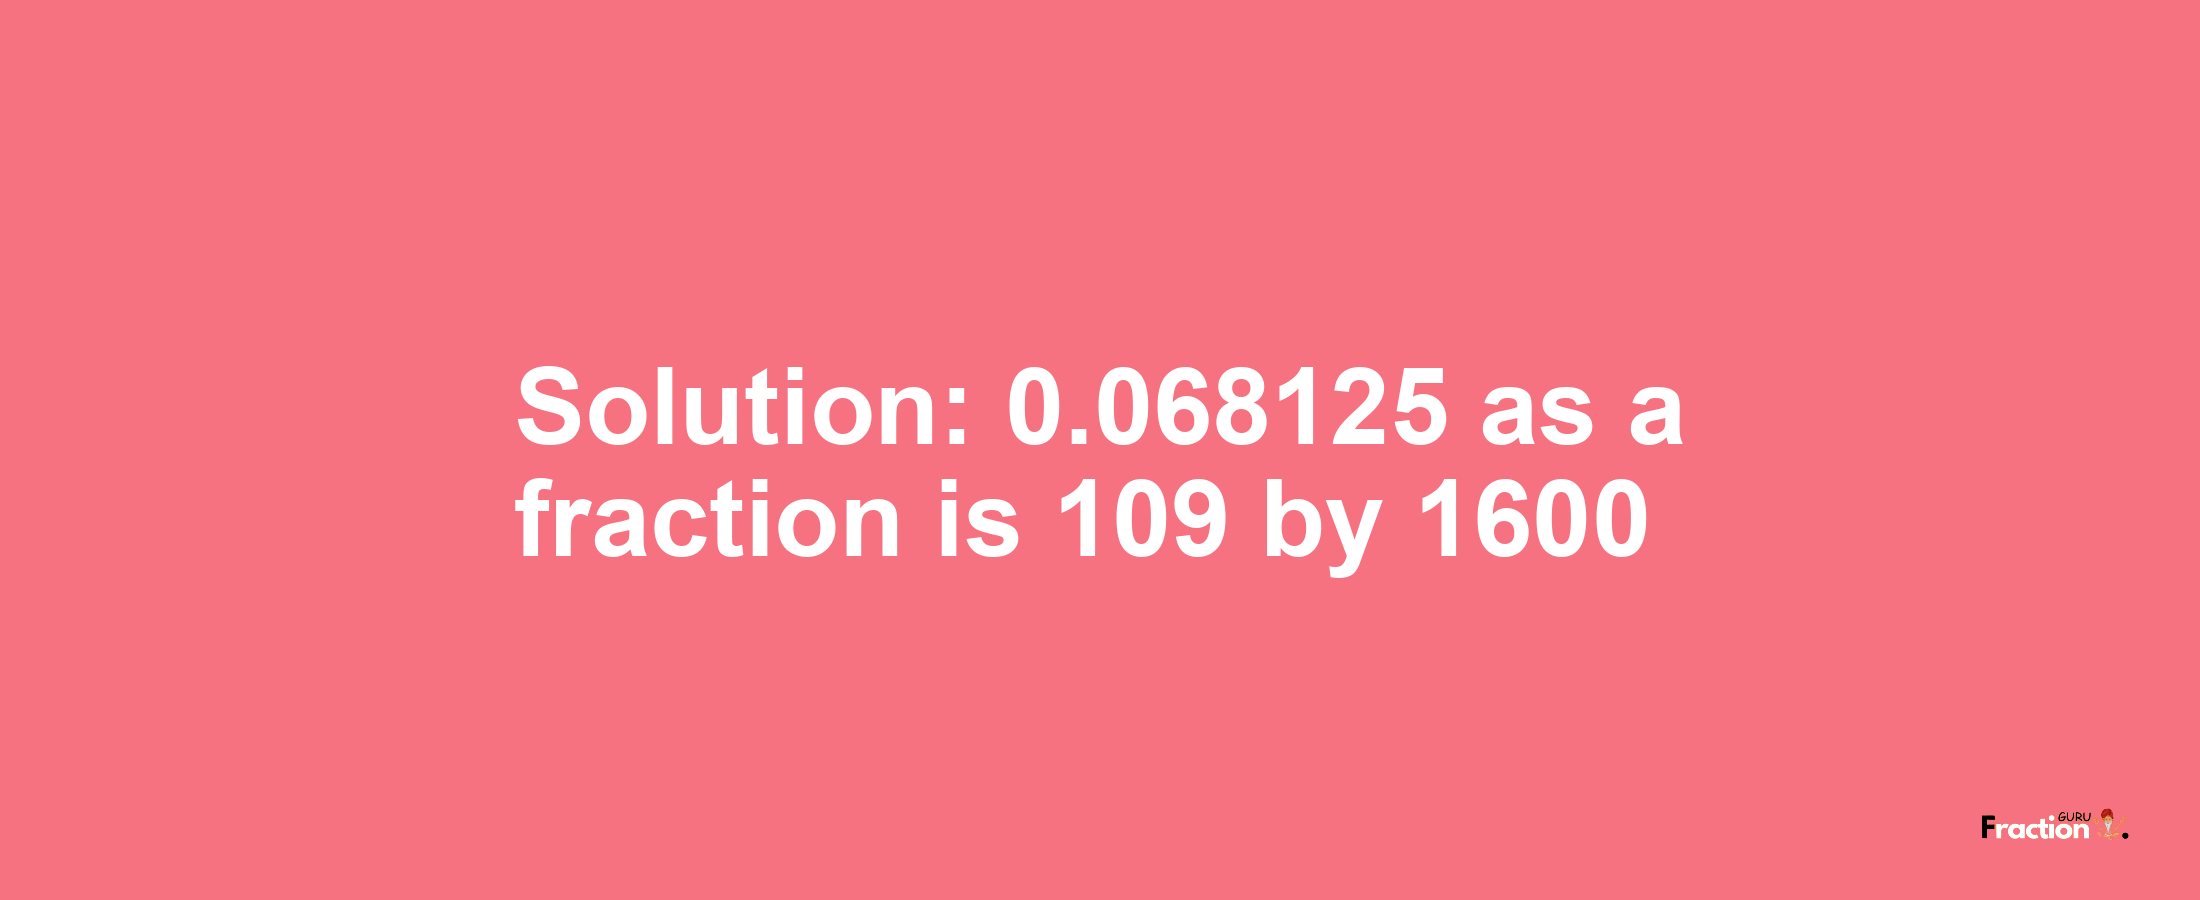 Solution:0.068125 as a fraction is 109/1600